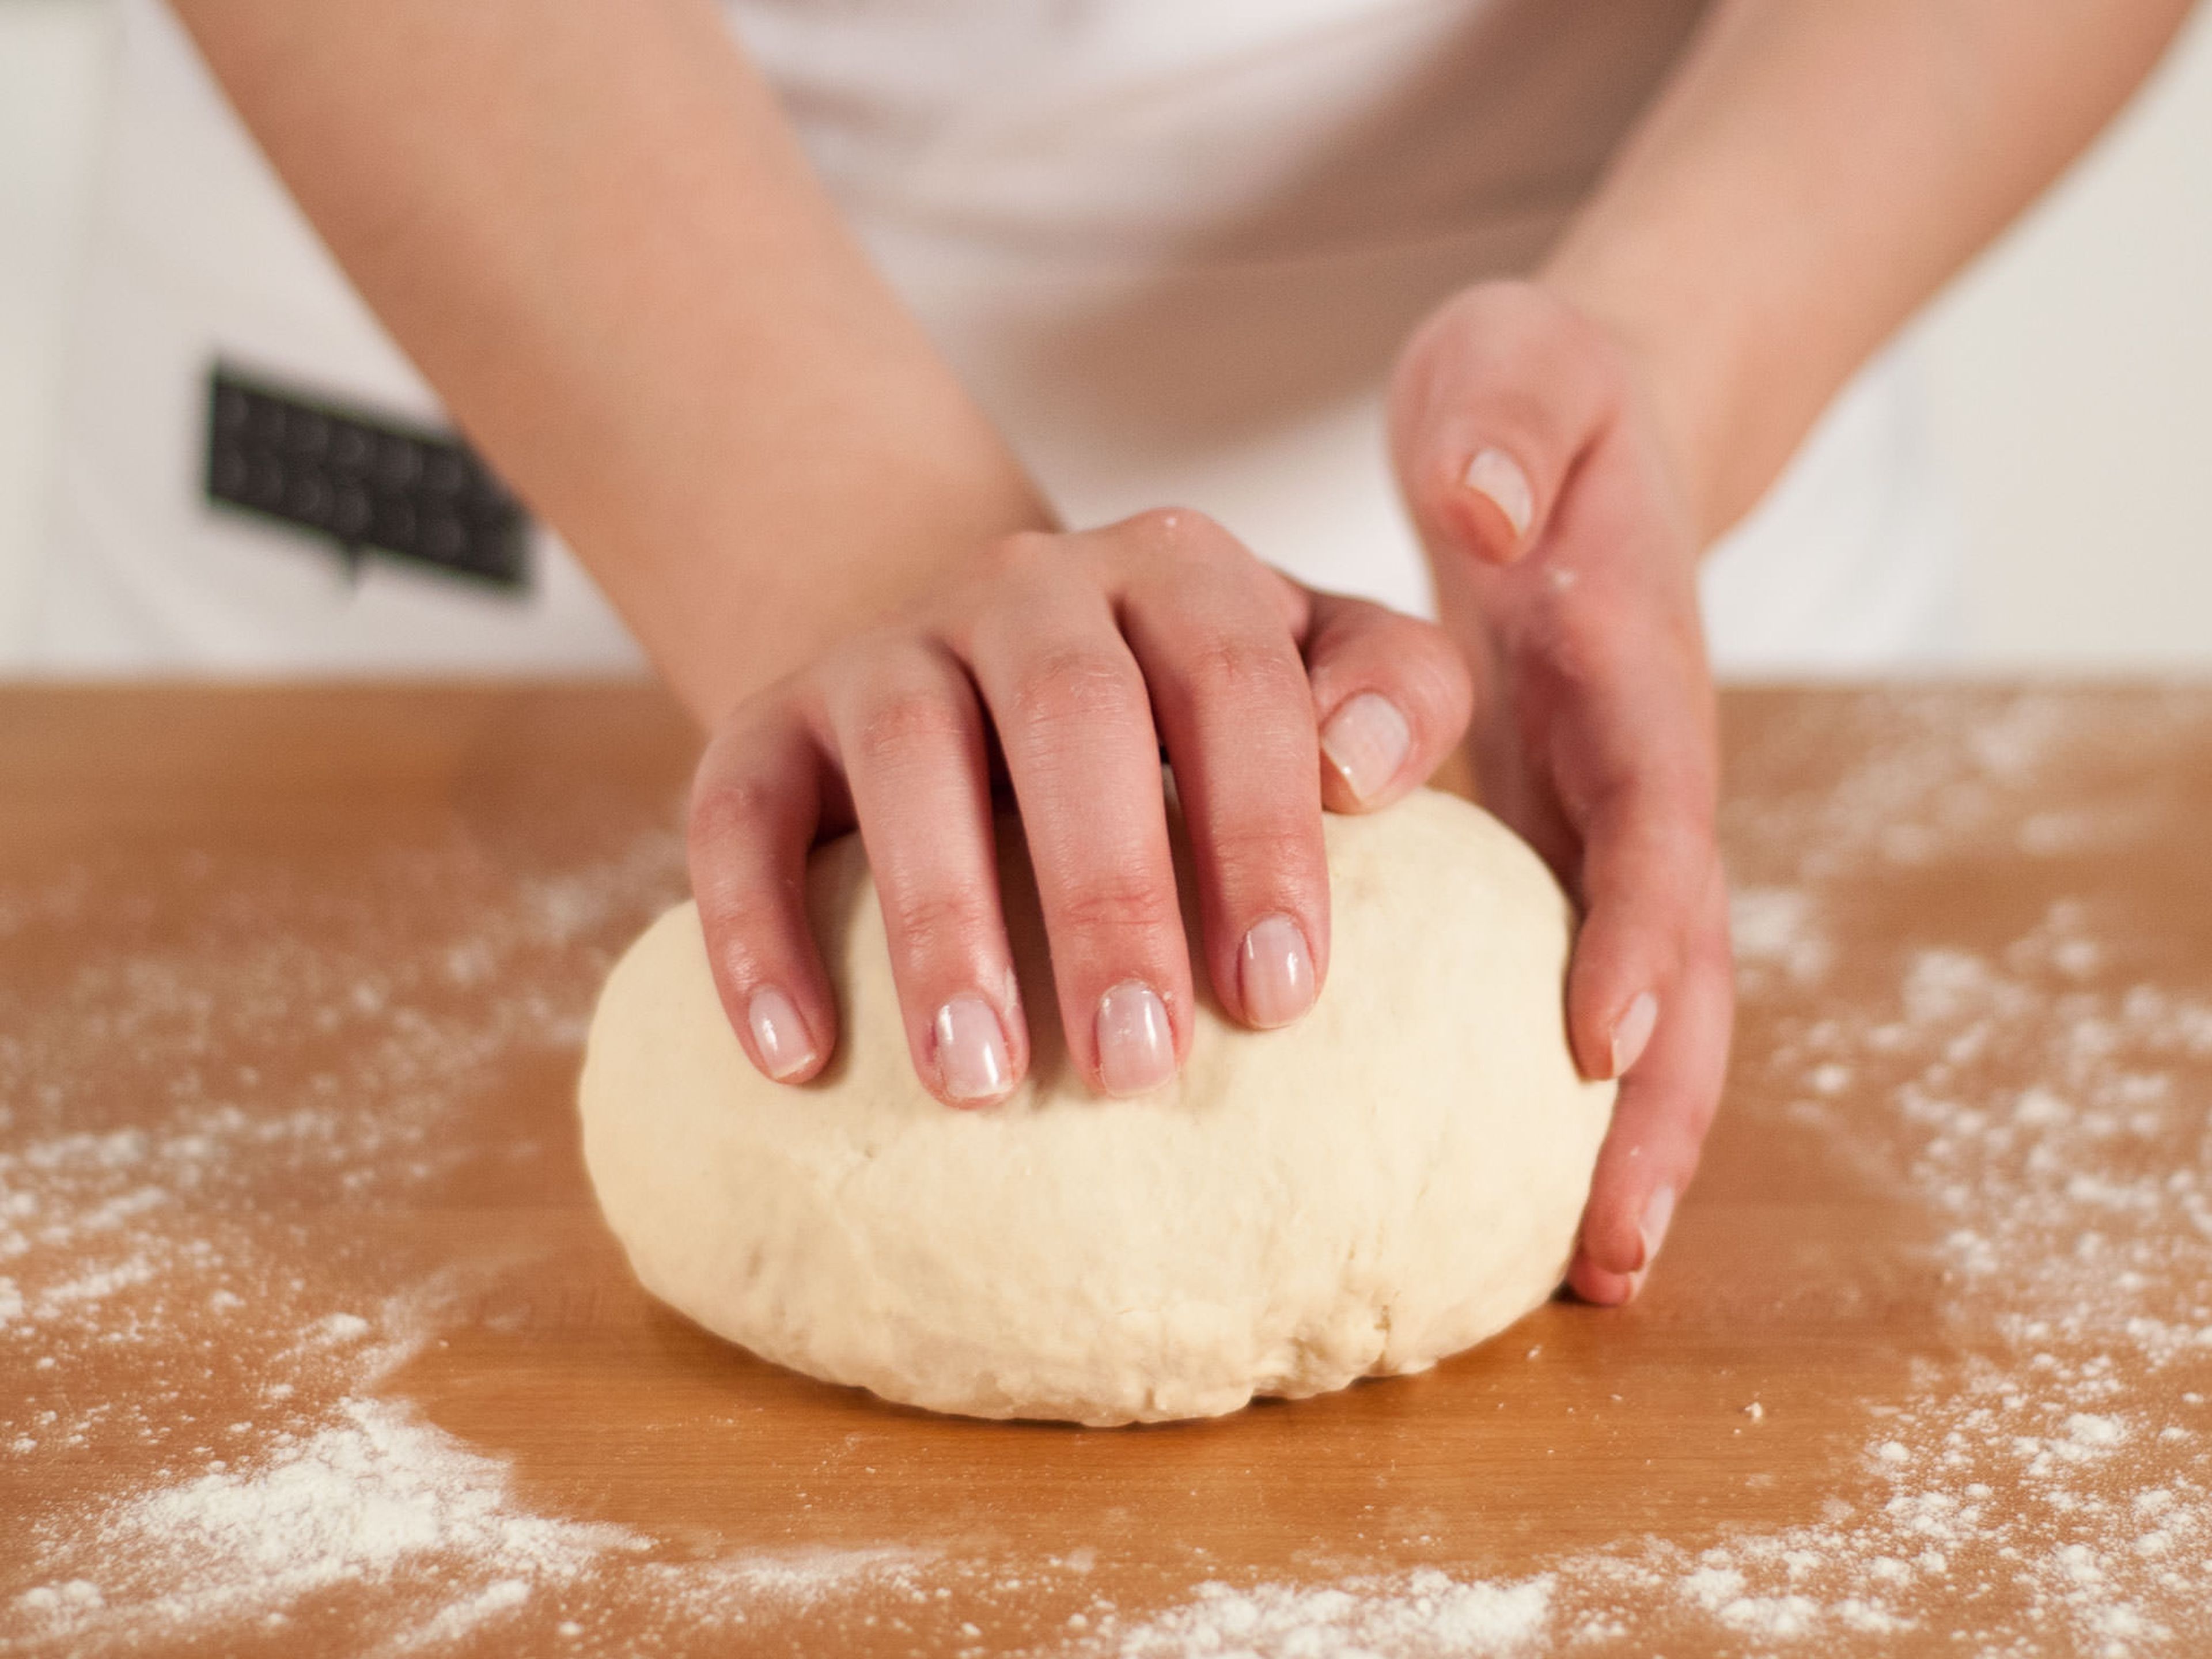 On a lightly floured surface, continue to knead dough by hand until smooth. Place into a bowl and cover with a clean kitchen towel. Set aside and allow to rest for approx. 30 – 40 min.